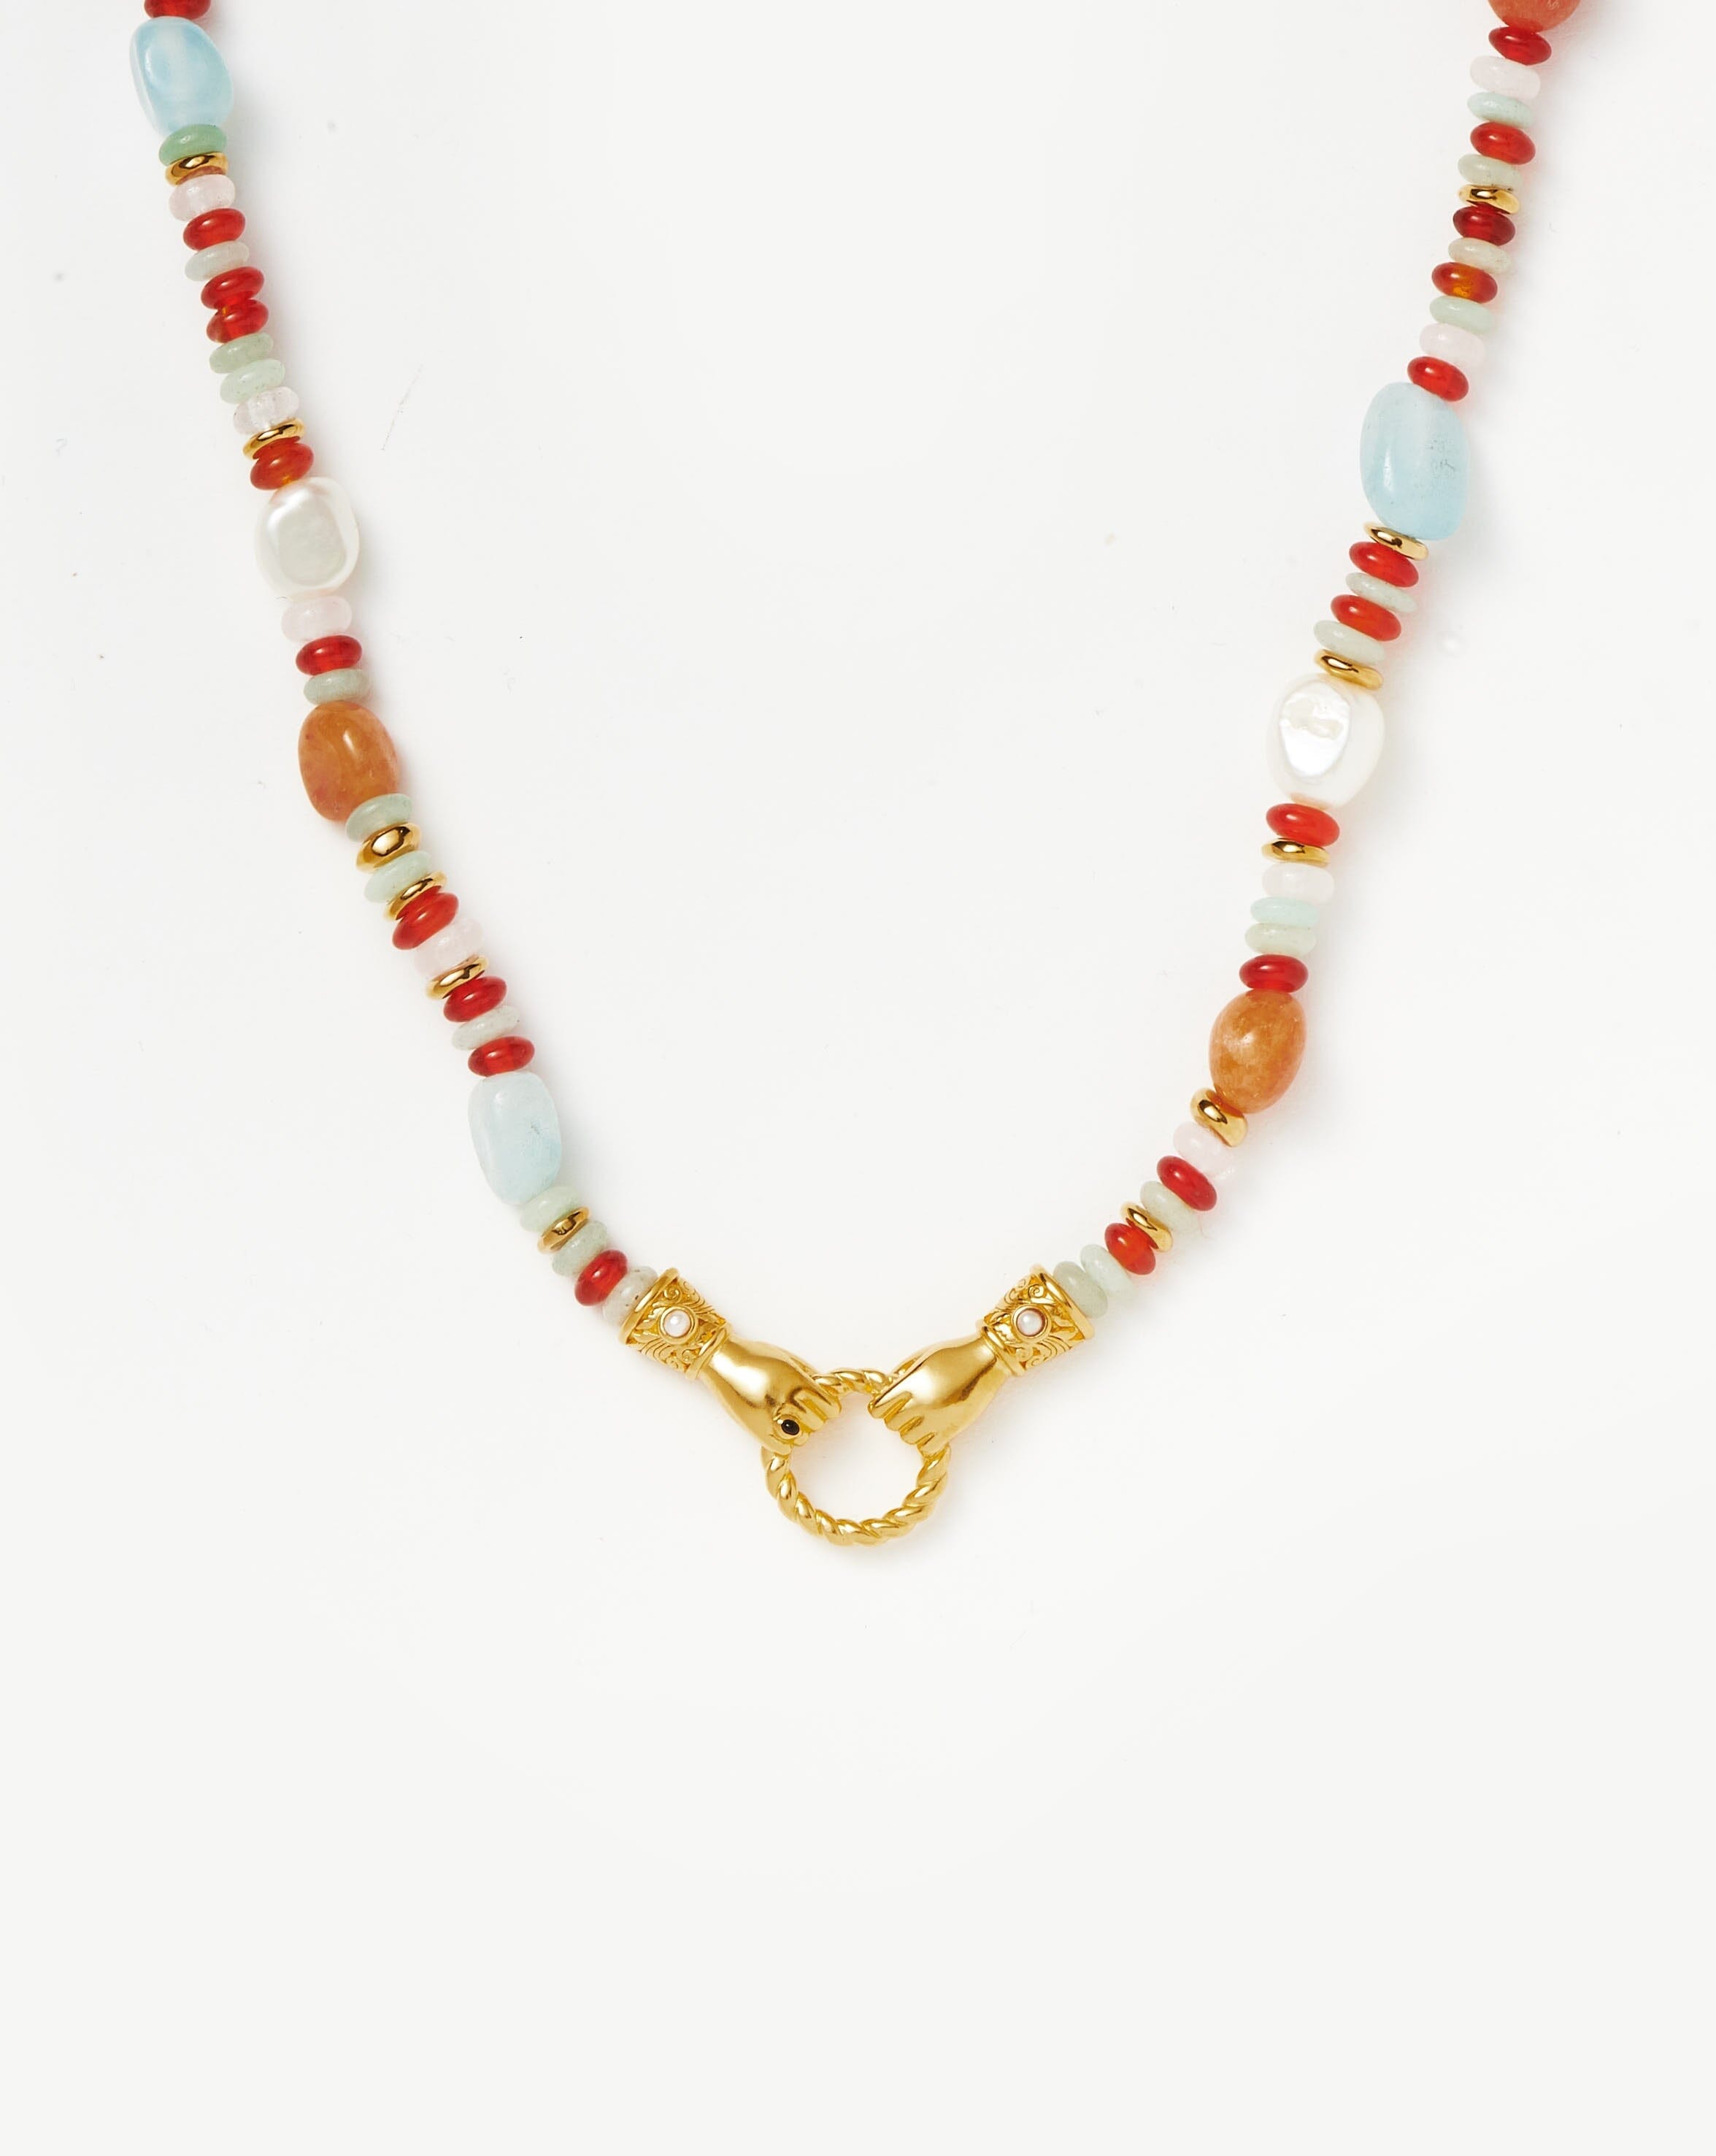 Missoma Harris Reed in Good Hands Beaded Gemstone Necklace | 18ct Gold Plated/Turquoise, Lapis & Pearl 18ct Gold Plated/Turquoise & Lapis & Pearl